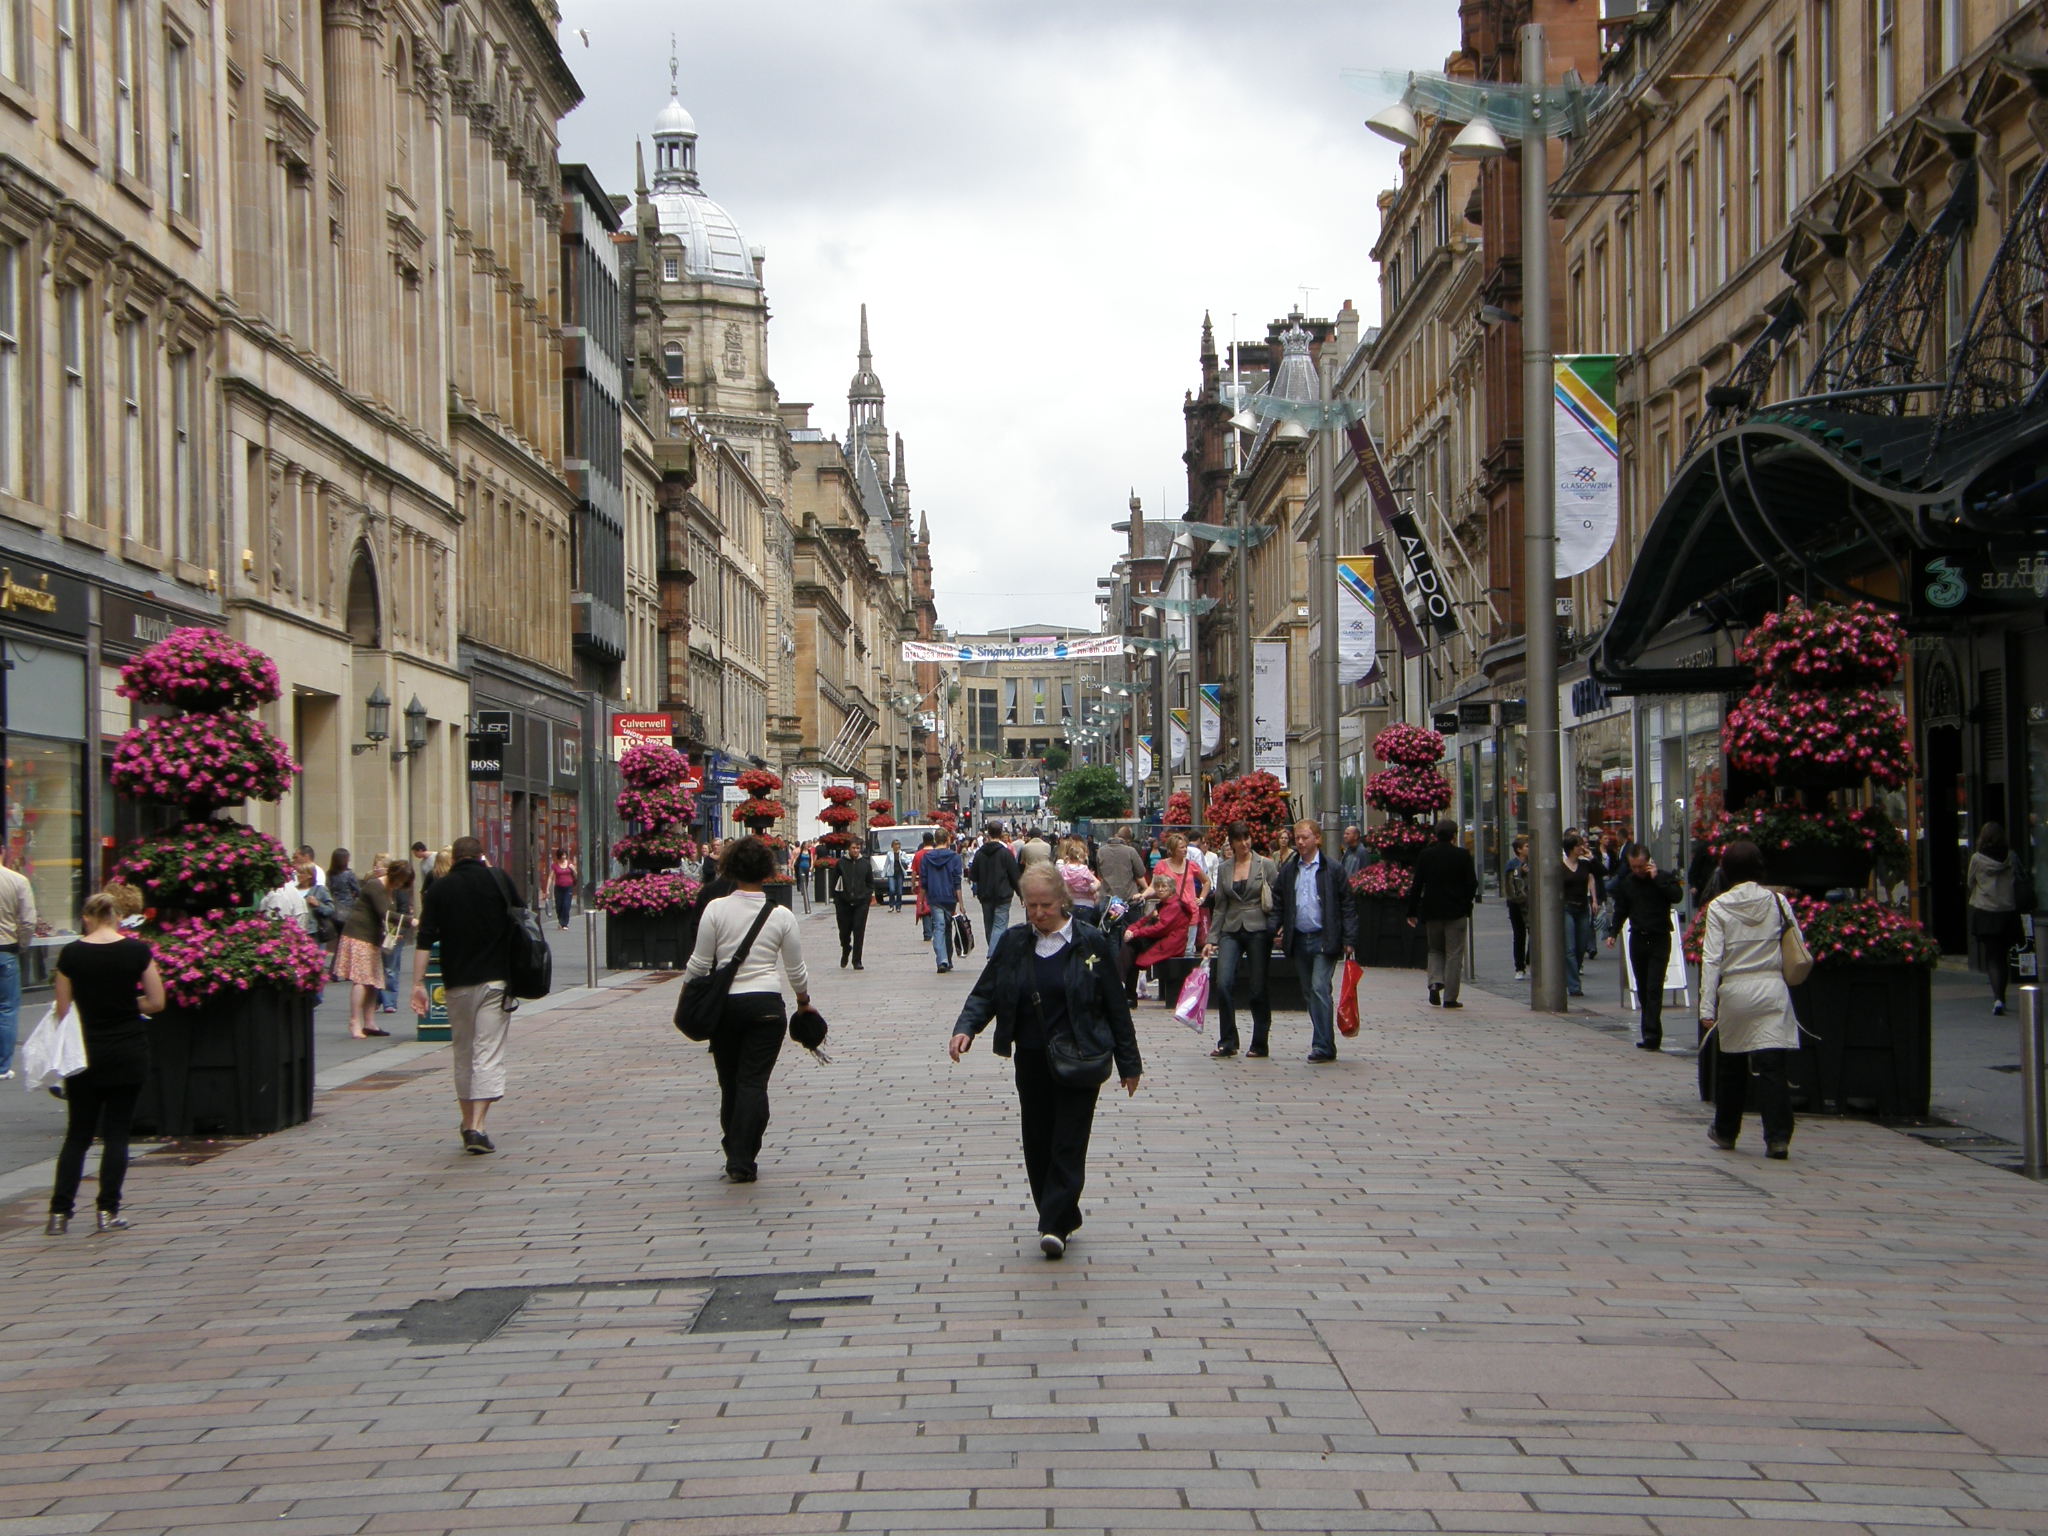 A pedestrianised street in Glasgow, paved with brick lined mostly with mid-19th century pedestrian buildings. The sky is gray, and the street environment is relatively hospitable.